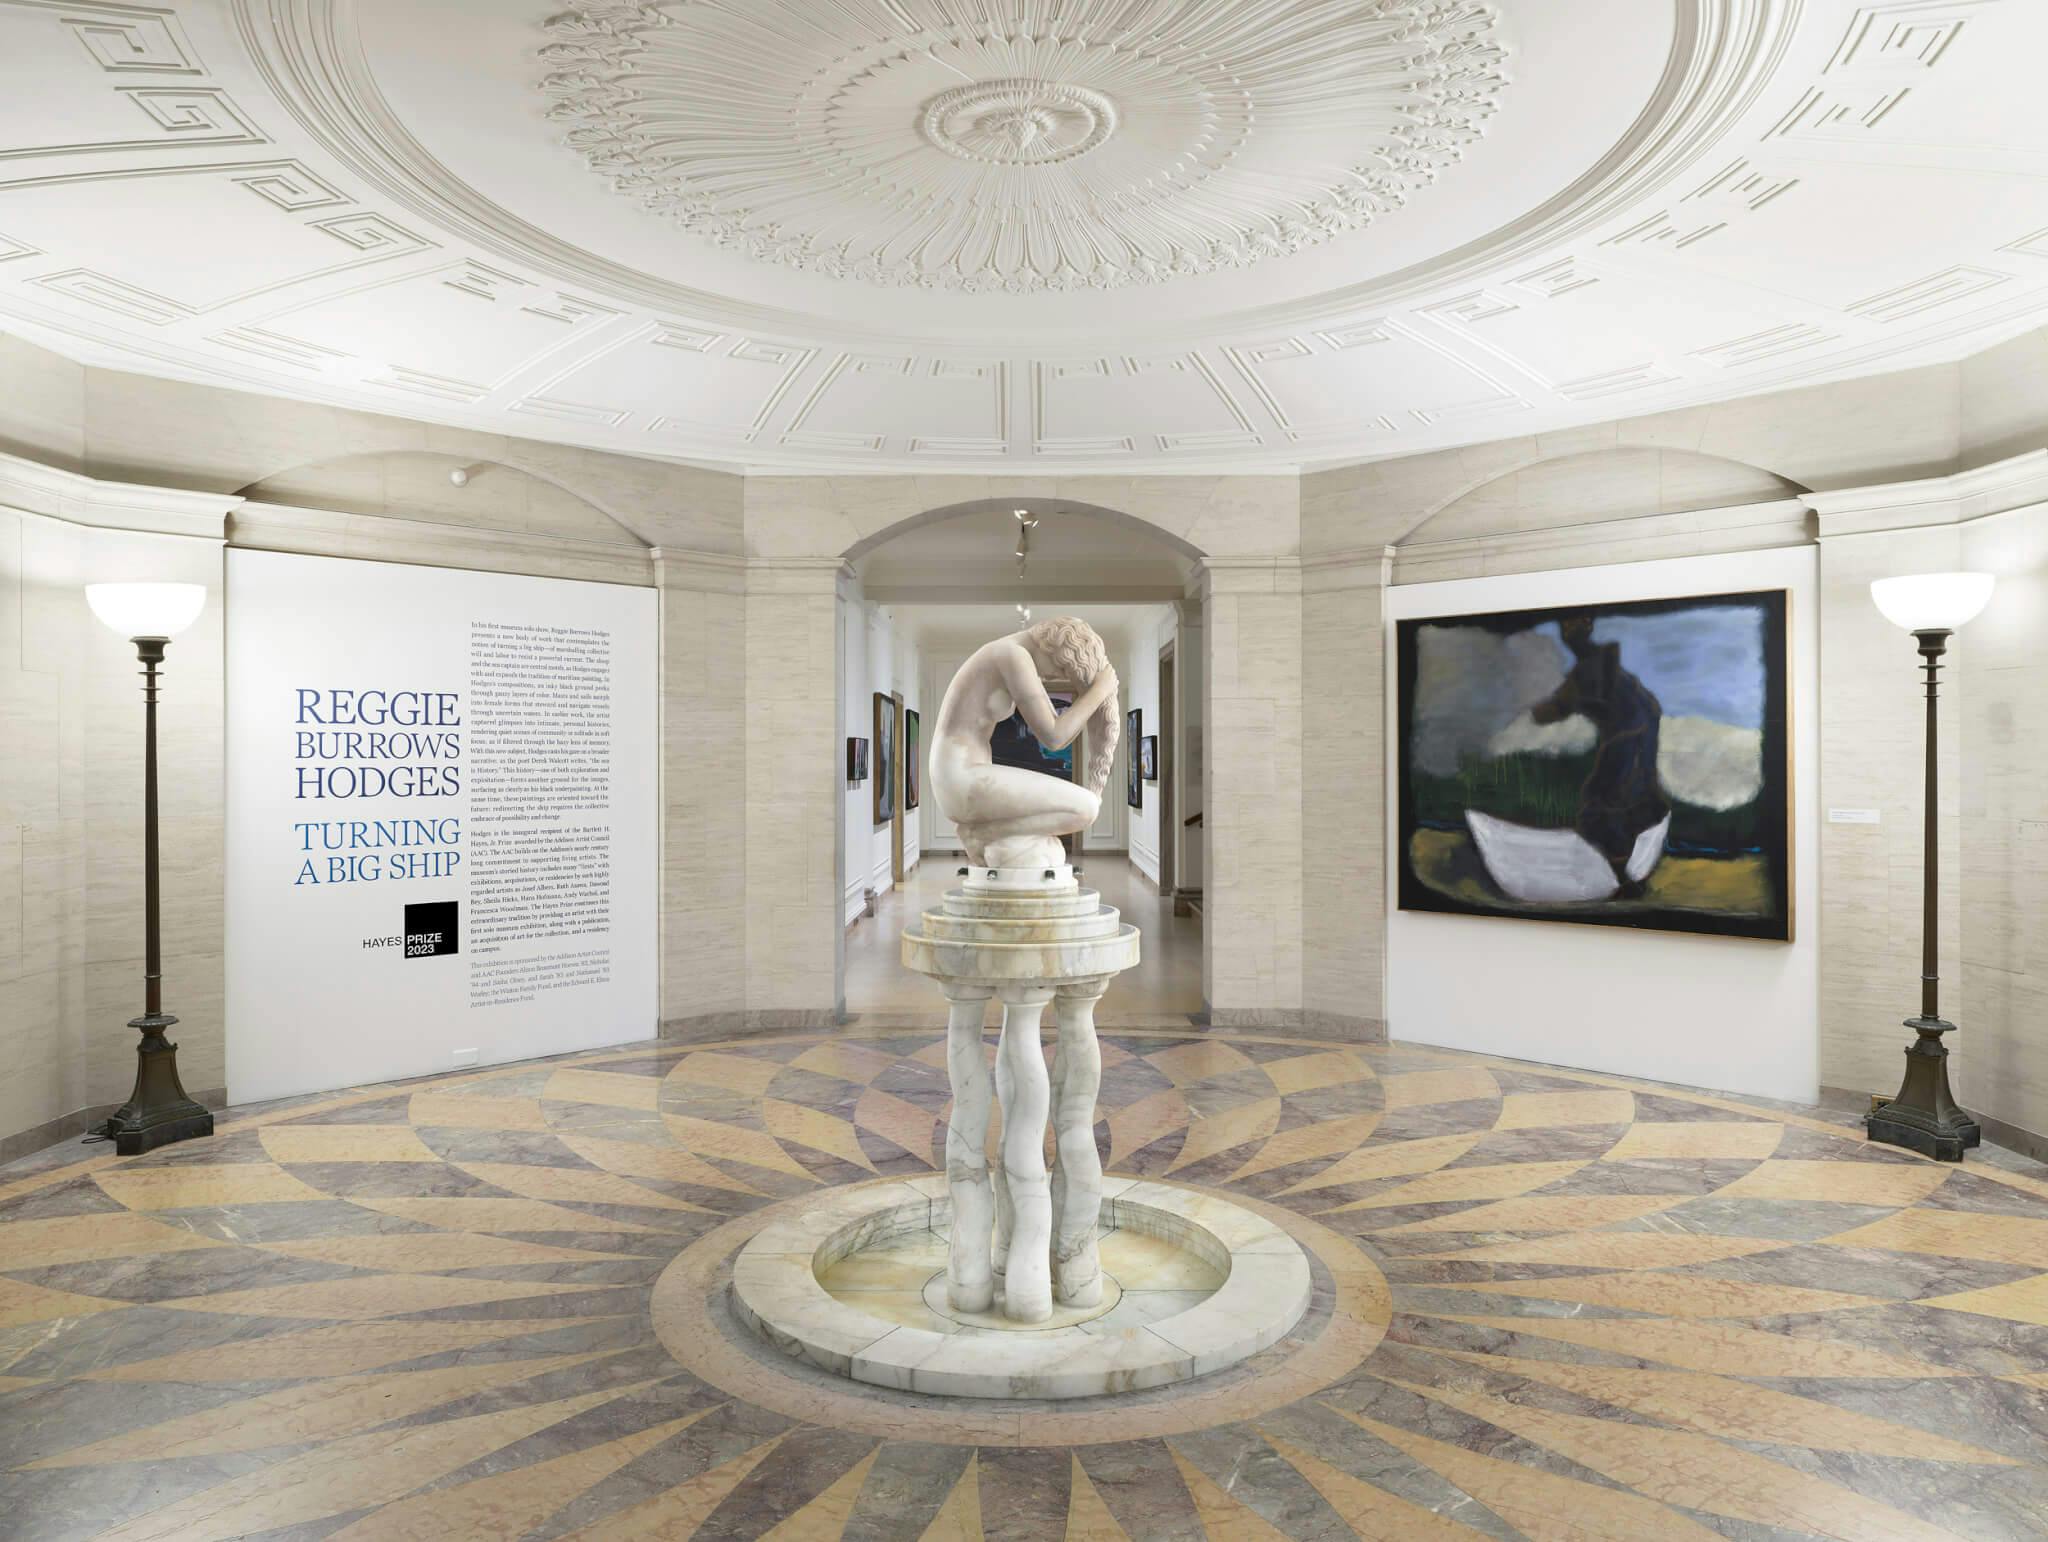 A white sculpture of the human form stands in the center of a grand space at the Addison Gallery of American Art.